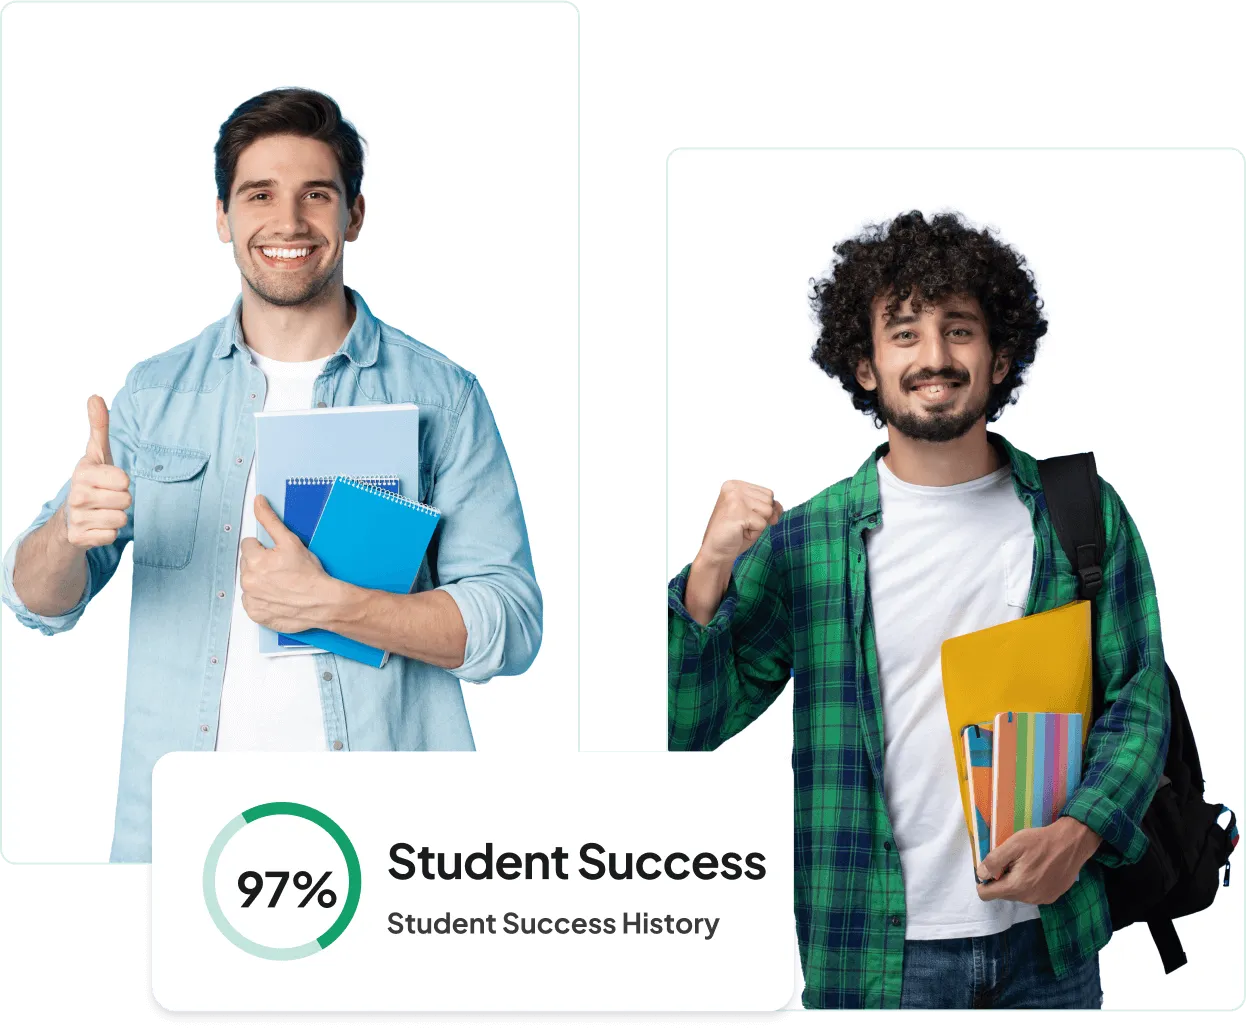 Our Student Success